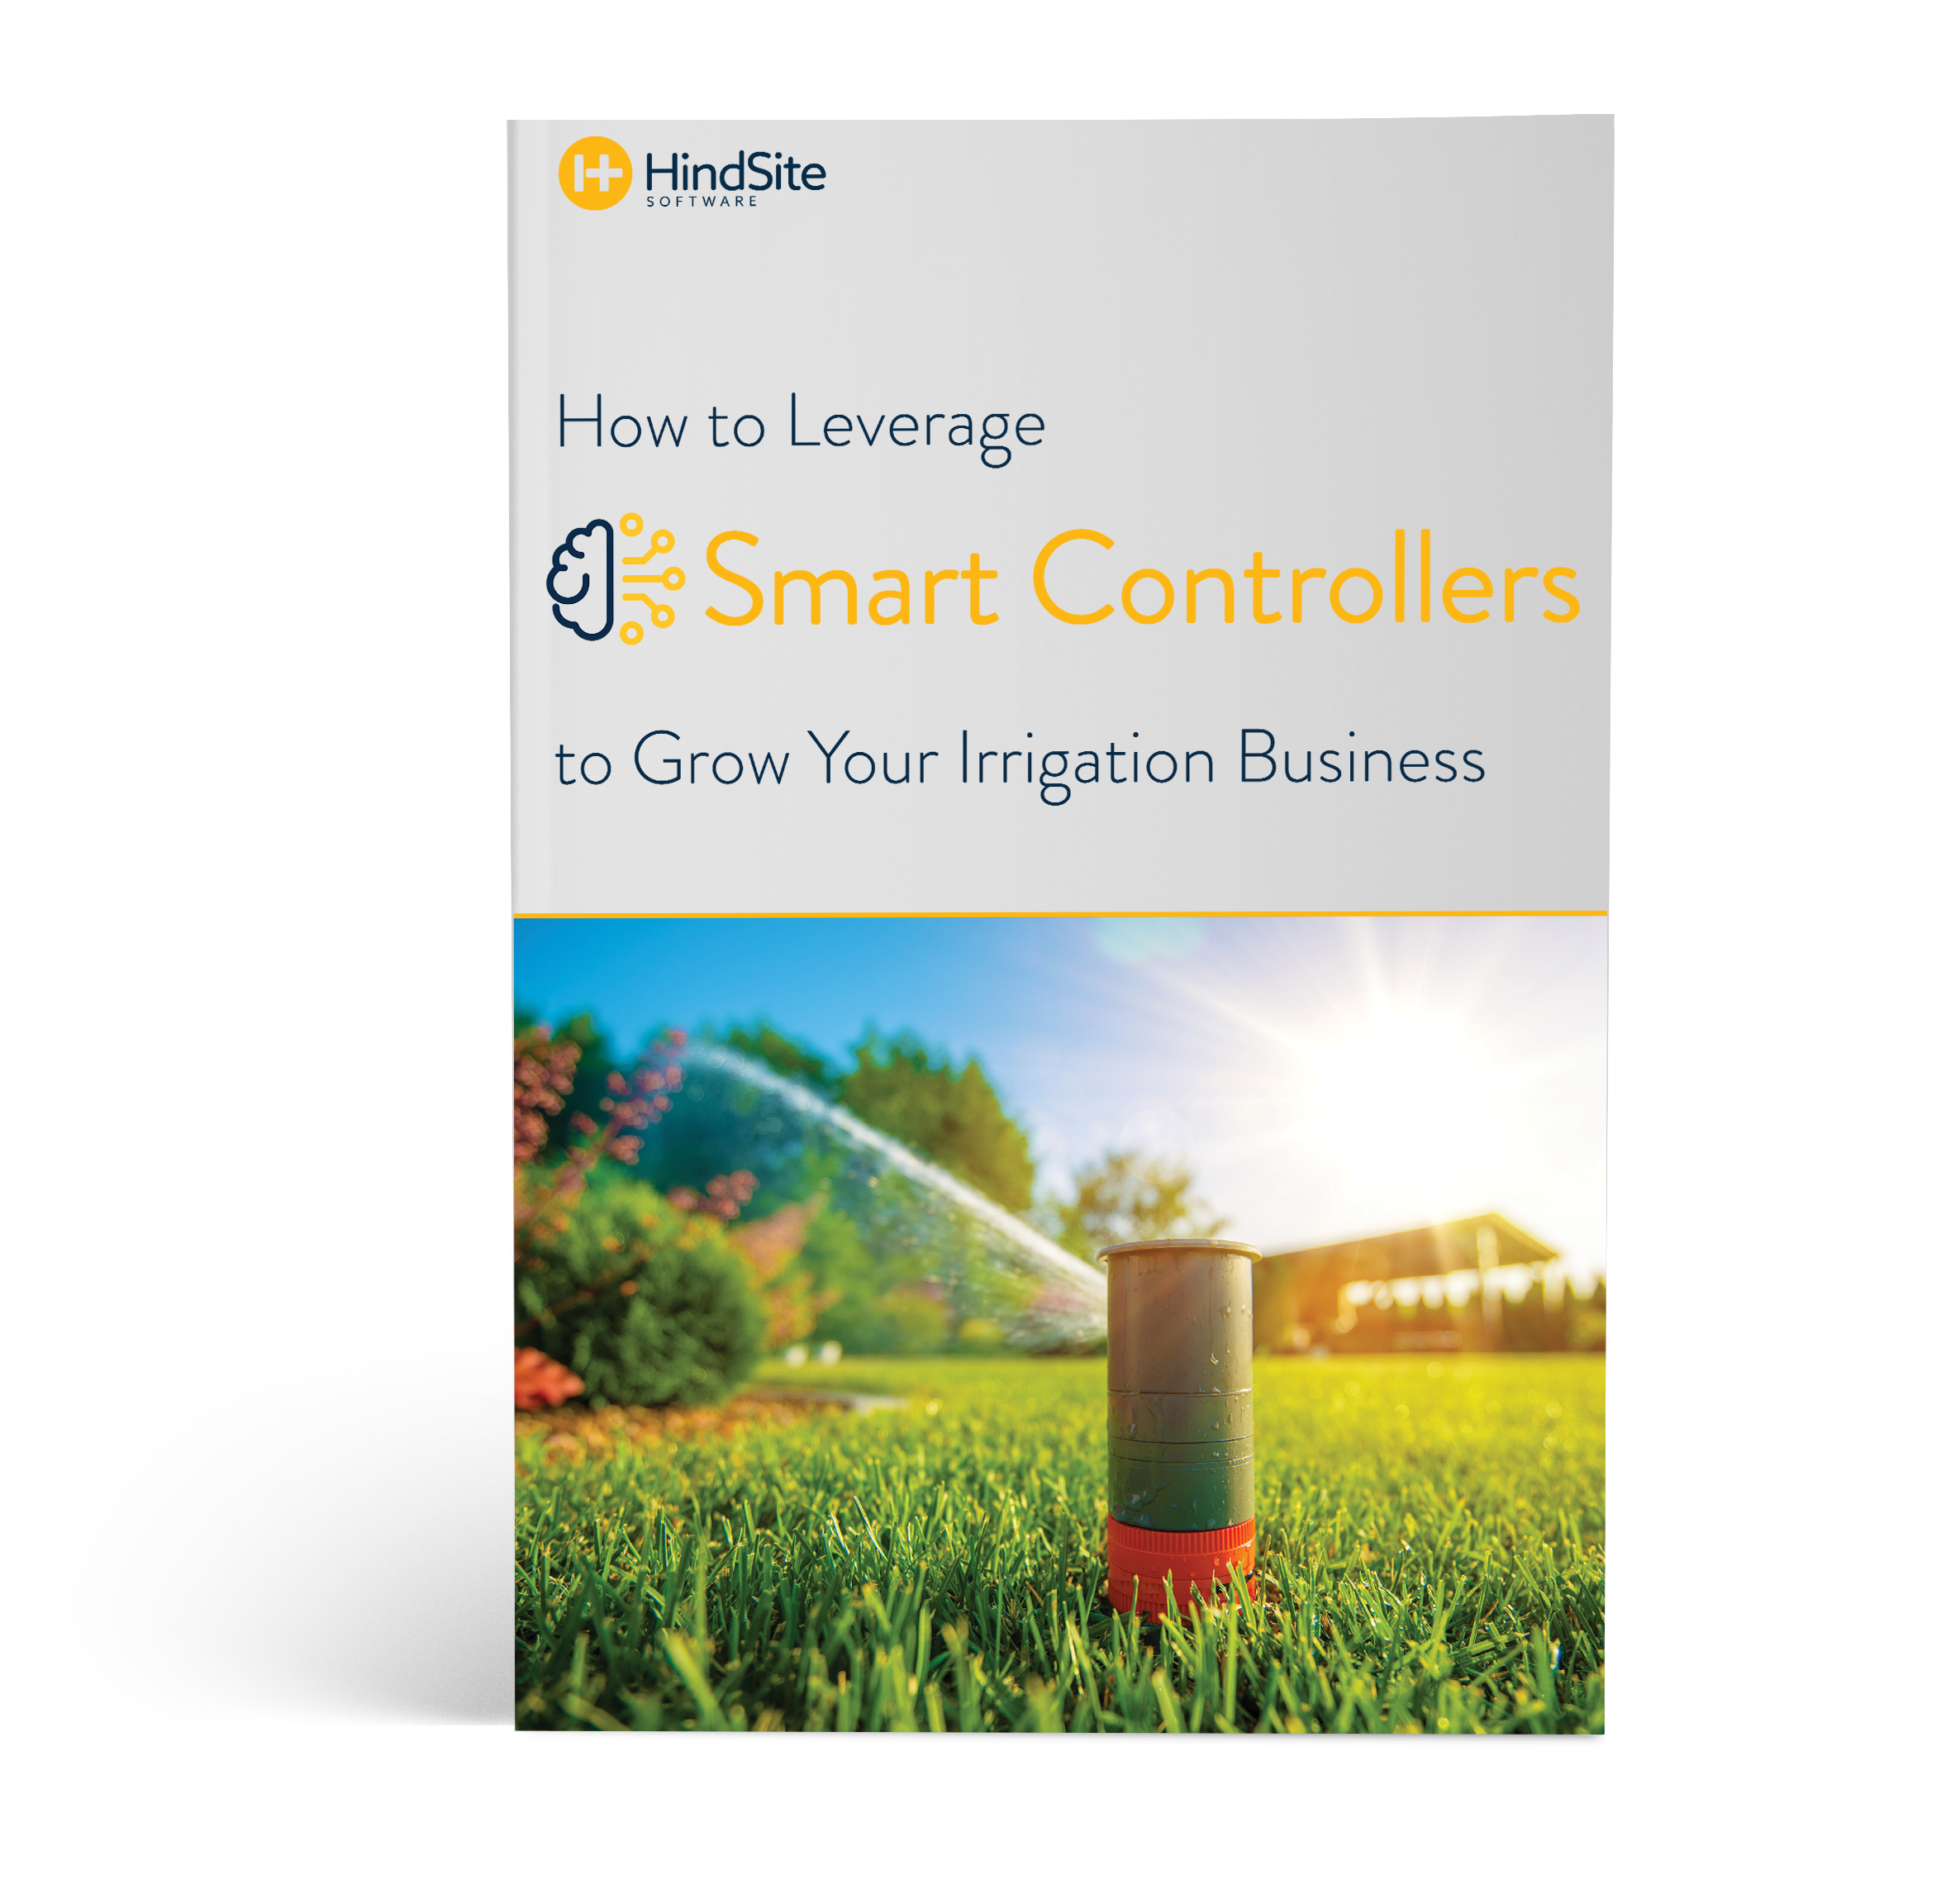 How to Leverage Smart Controllers to Grow Your Irrigation Business ebook cover.